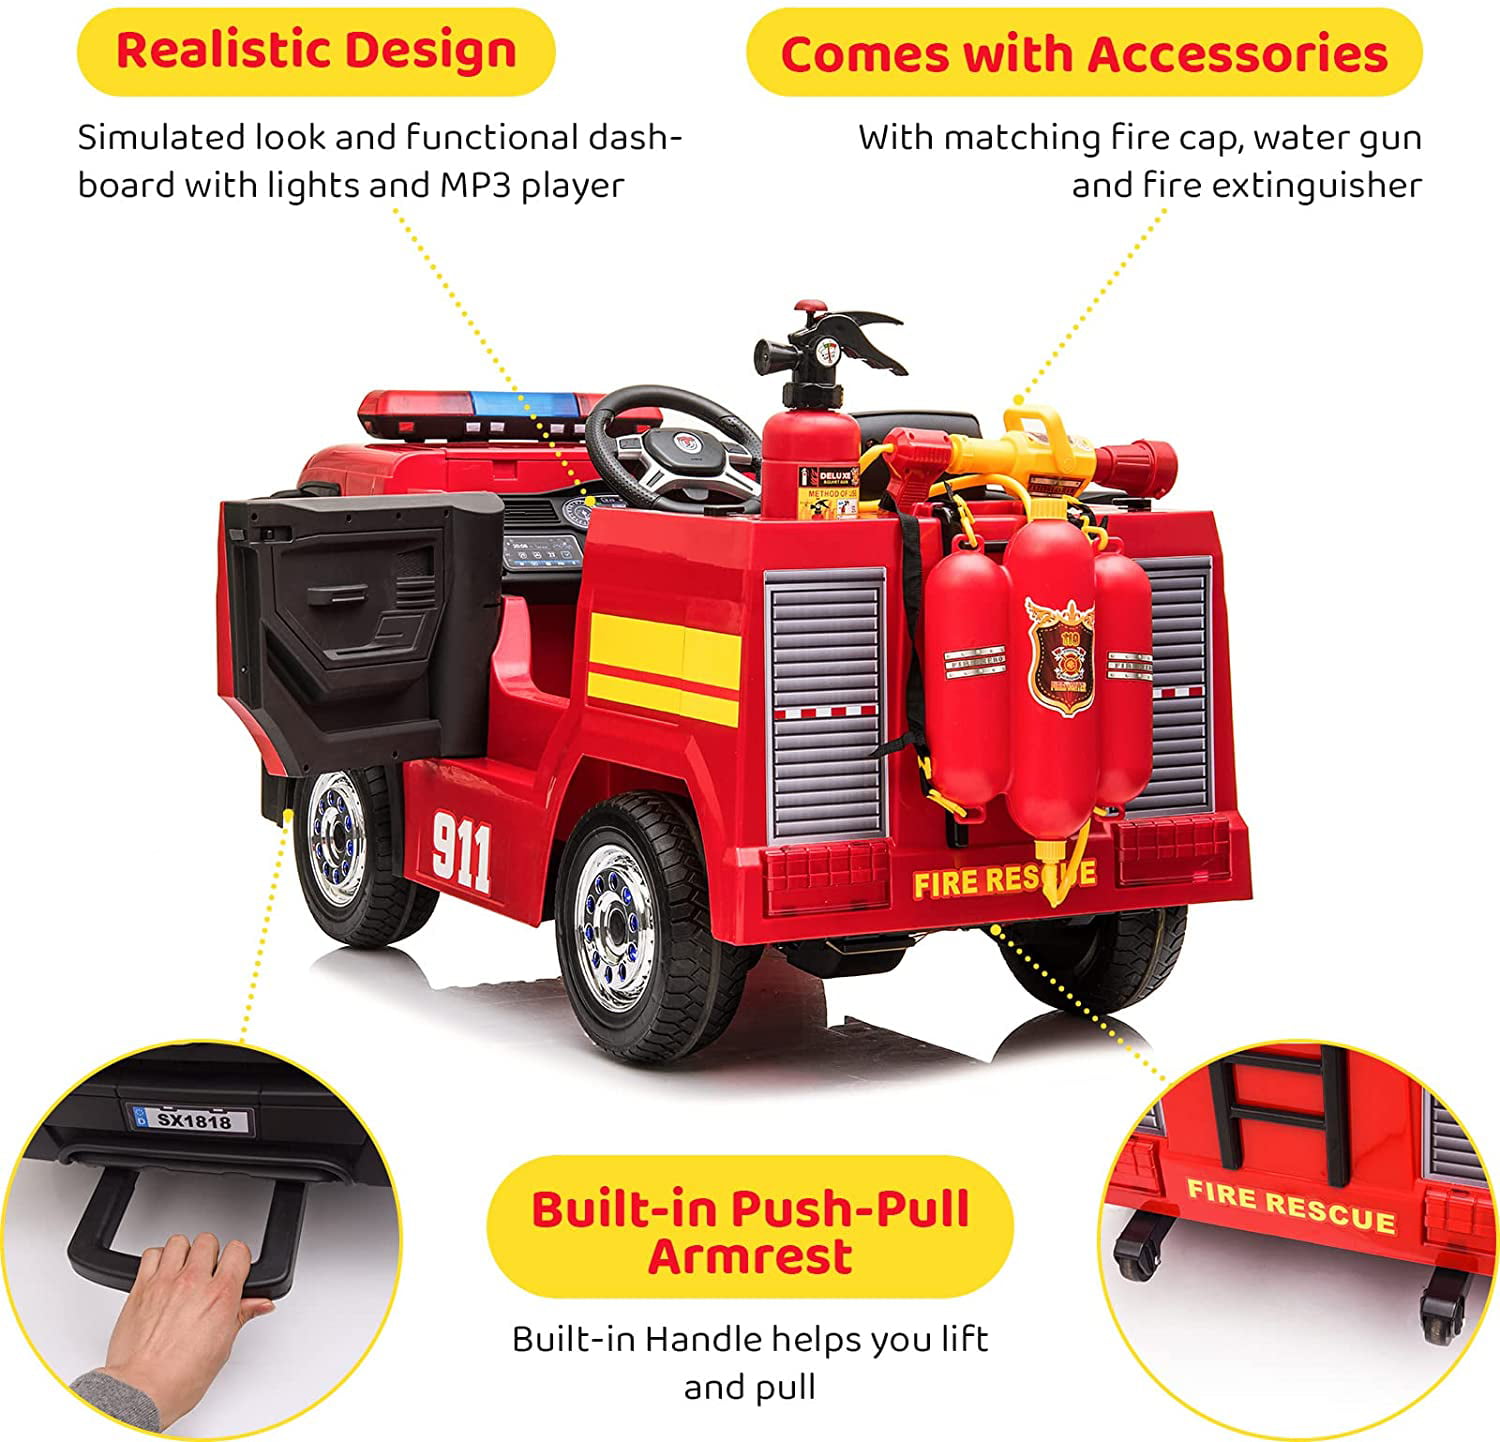 2 Seater Fire Truck Ride On Toy W/Wireless Control Working Water Shoot